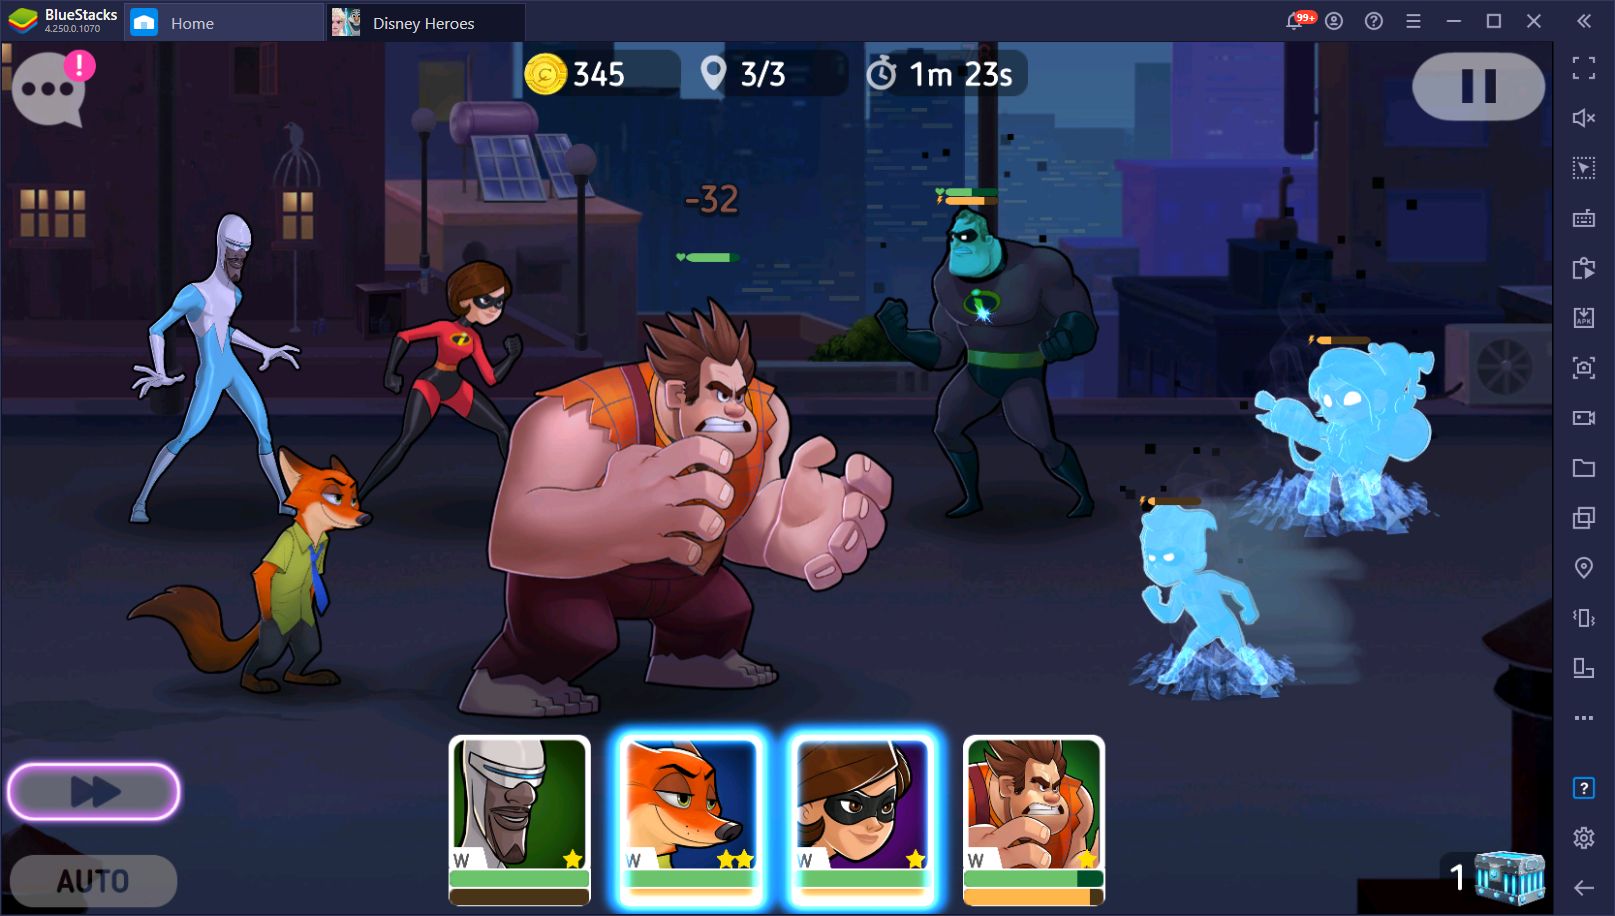 Disney Heroes: Battle Mode Combat Guide - Tips and Tricks to Win all Your Fights